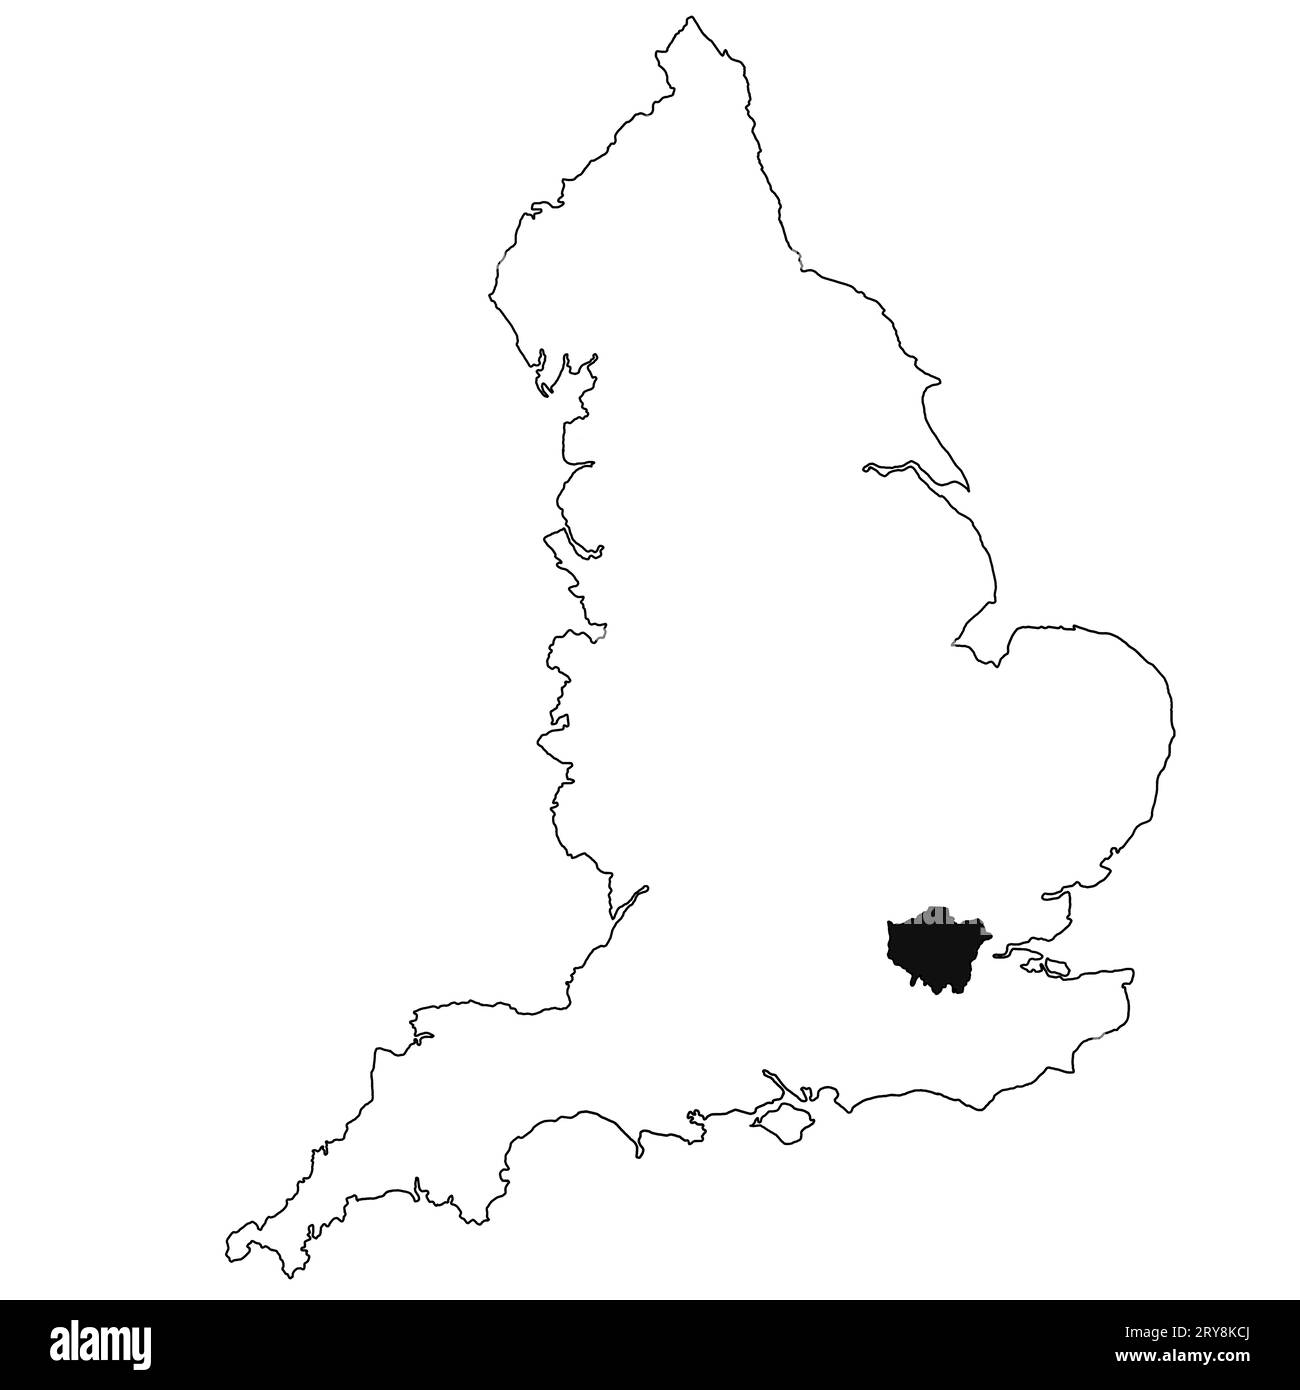 Map of London in England on white background. single region map highlighted by black colour on England administrative map. Stock Photo